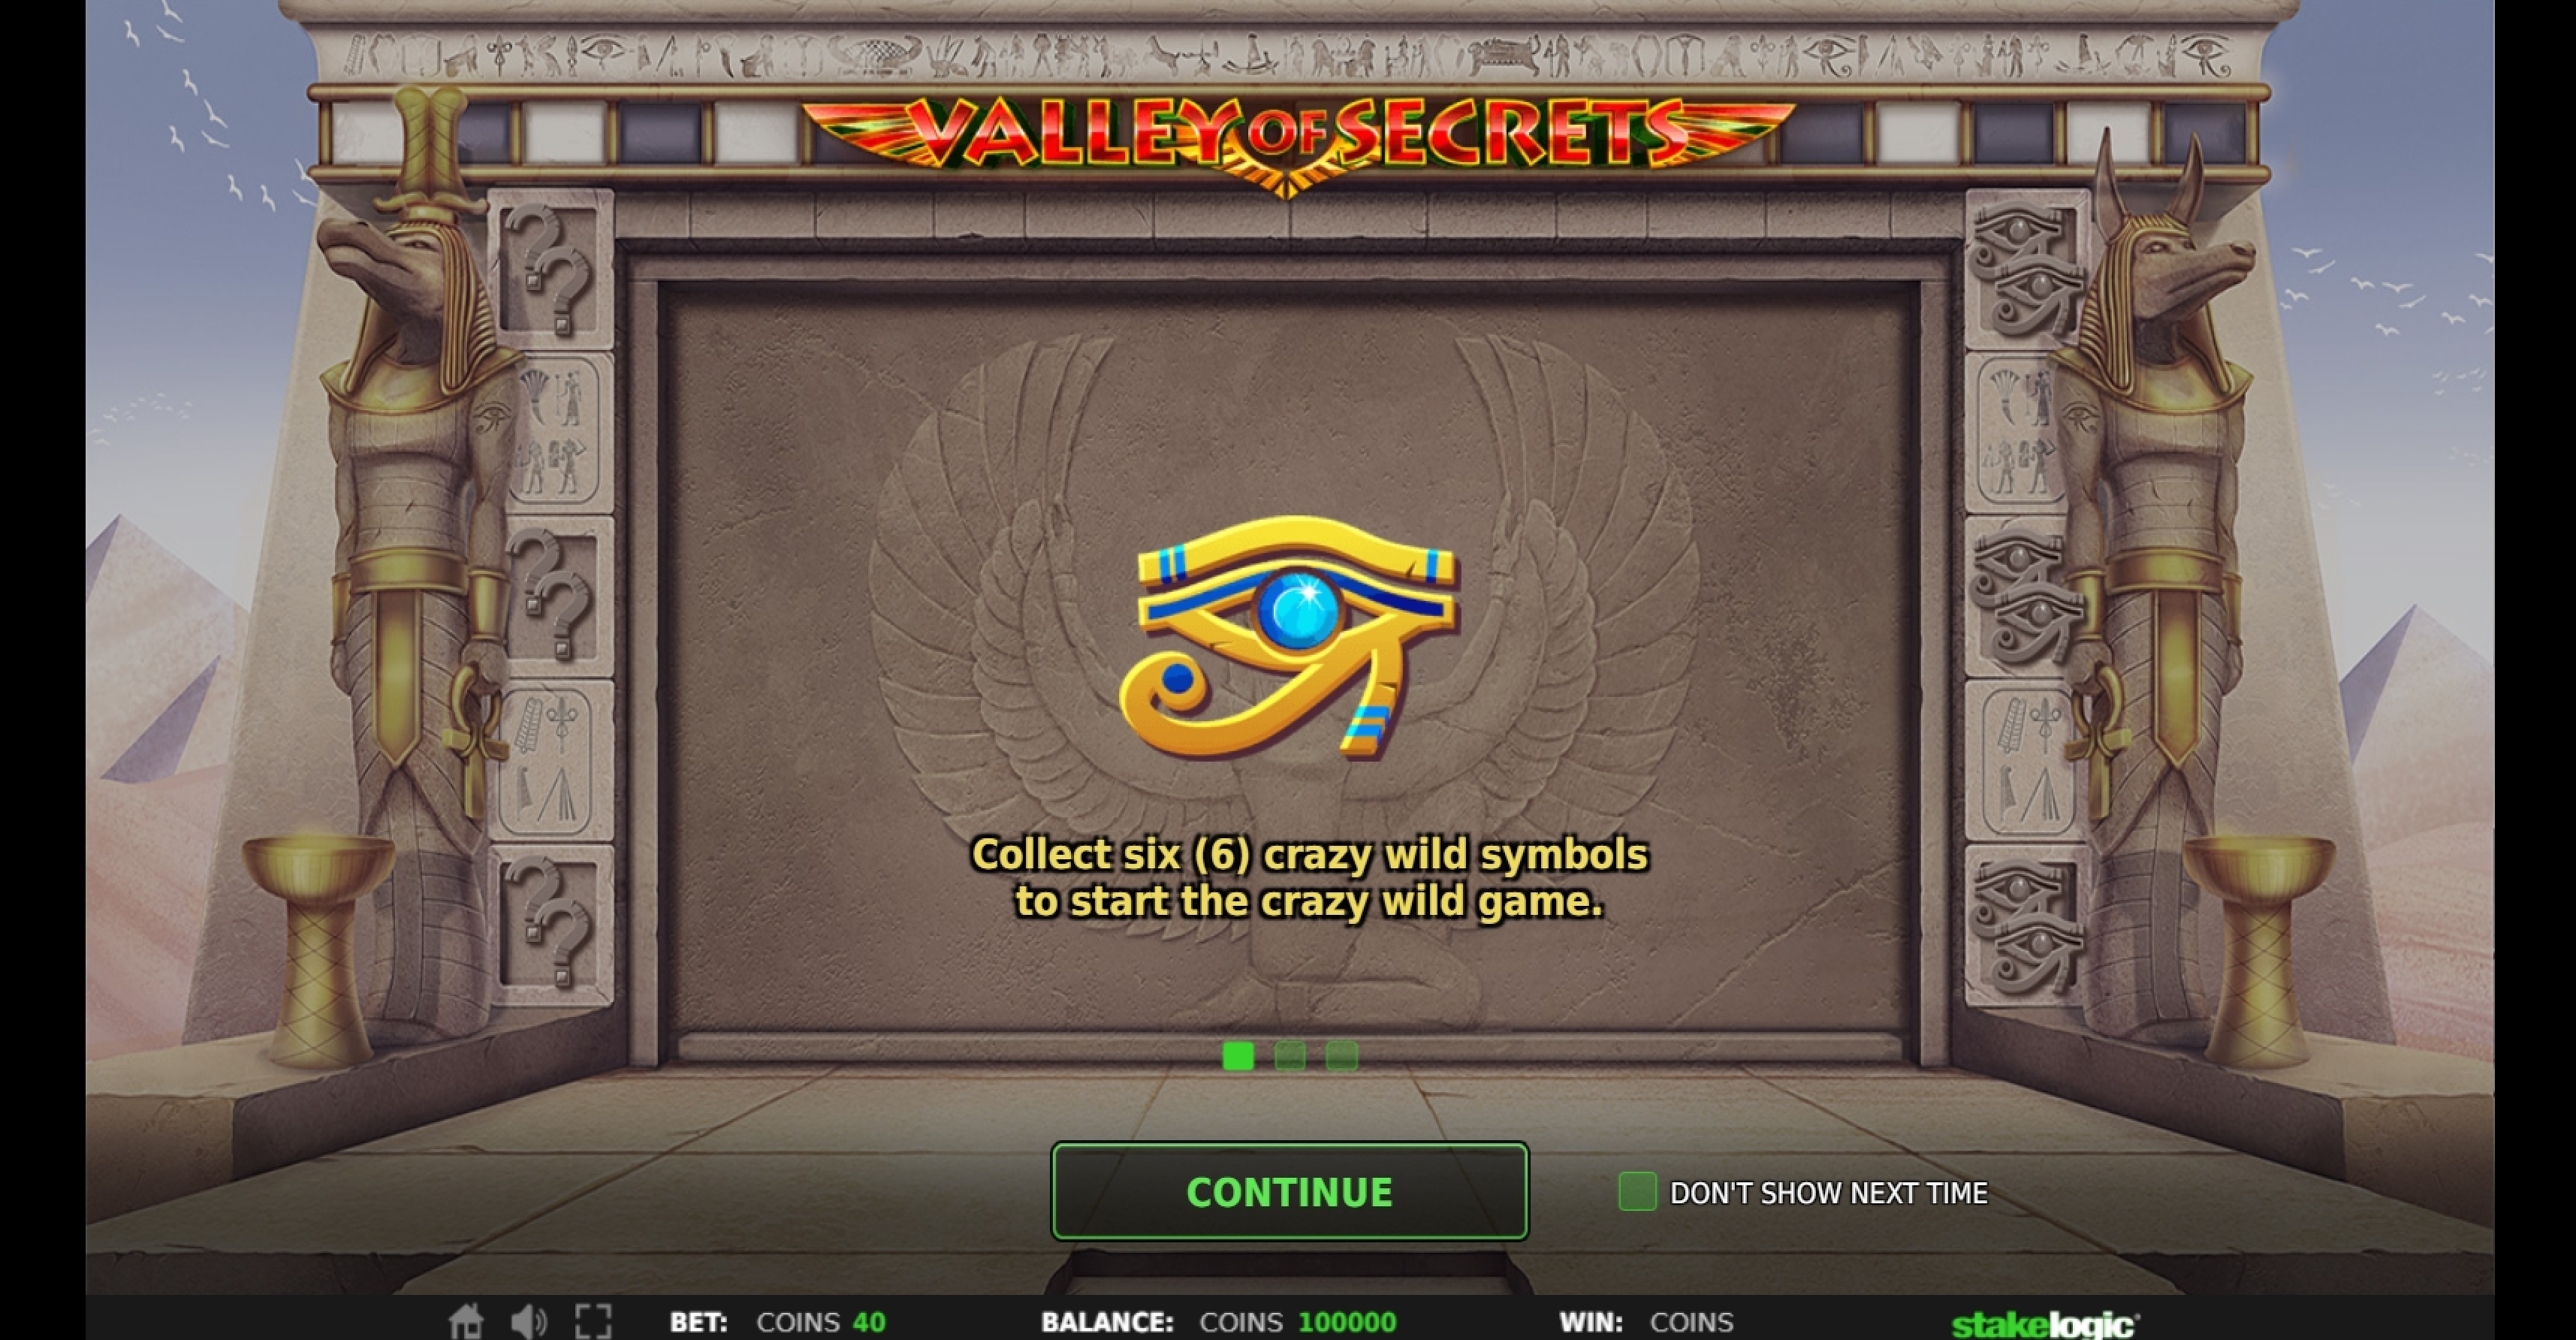 Play Valley of Secrets Free Casino Slot Game by Stakelogic